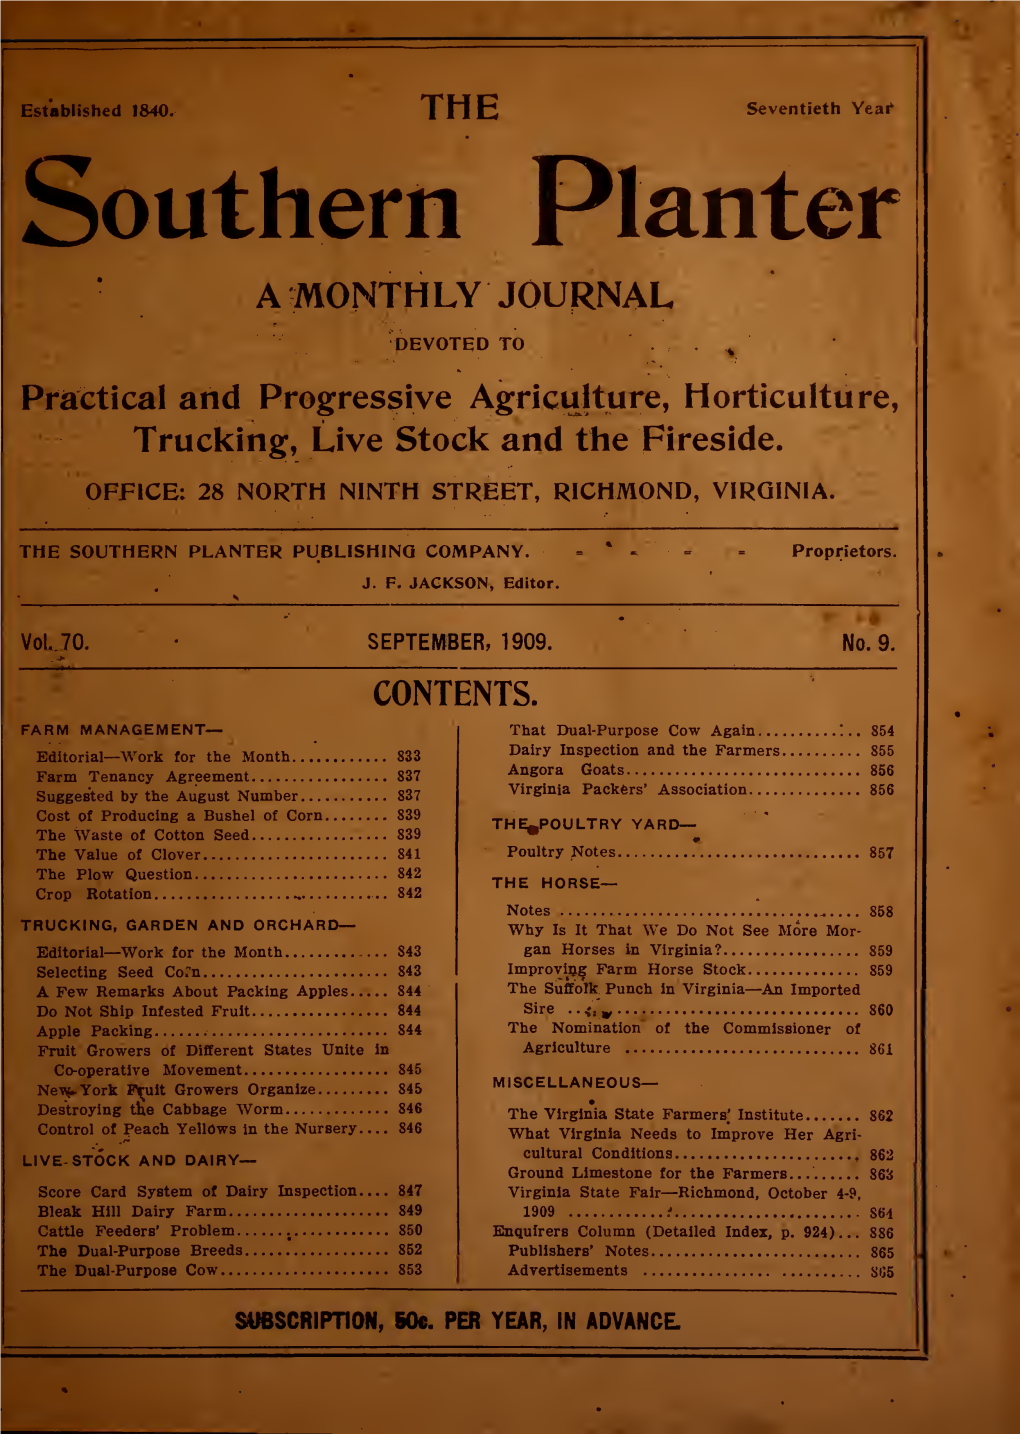 Southern Planter a MONTHLY JOURNAL DEVOTED TO